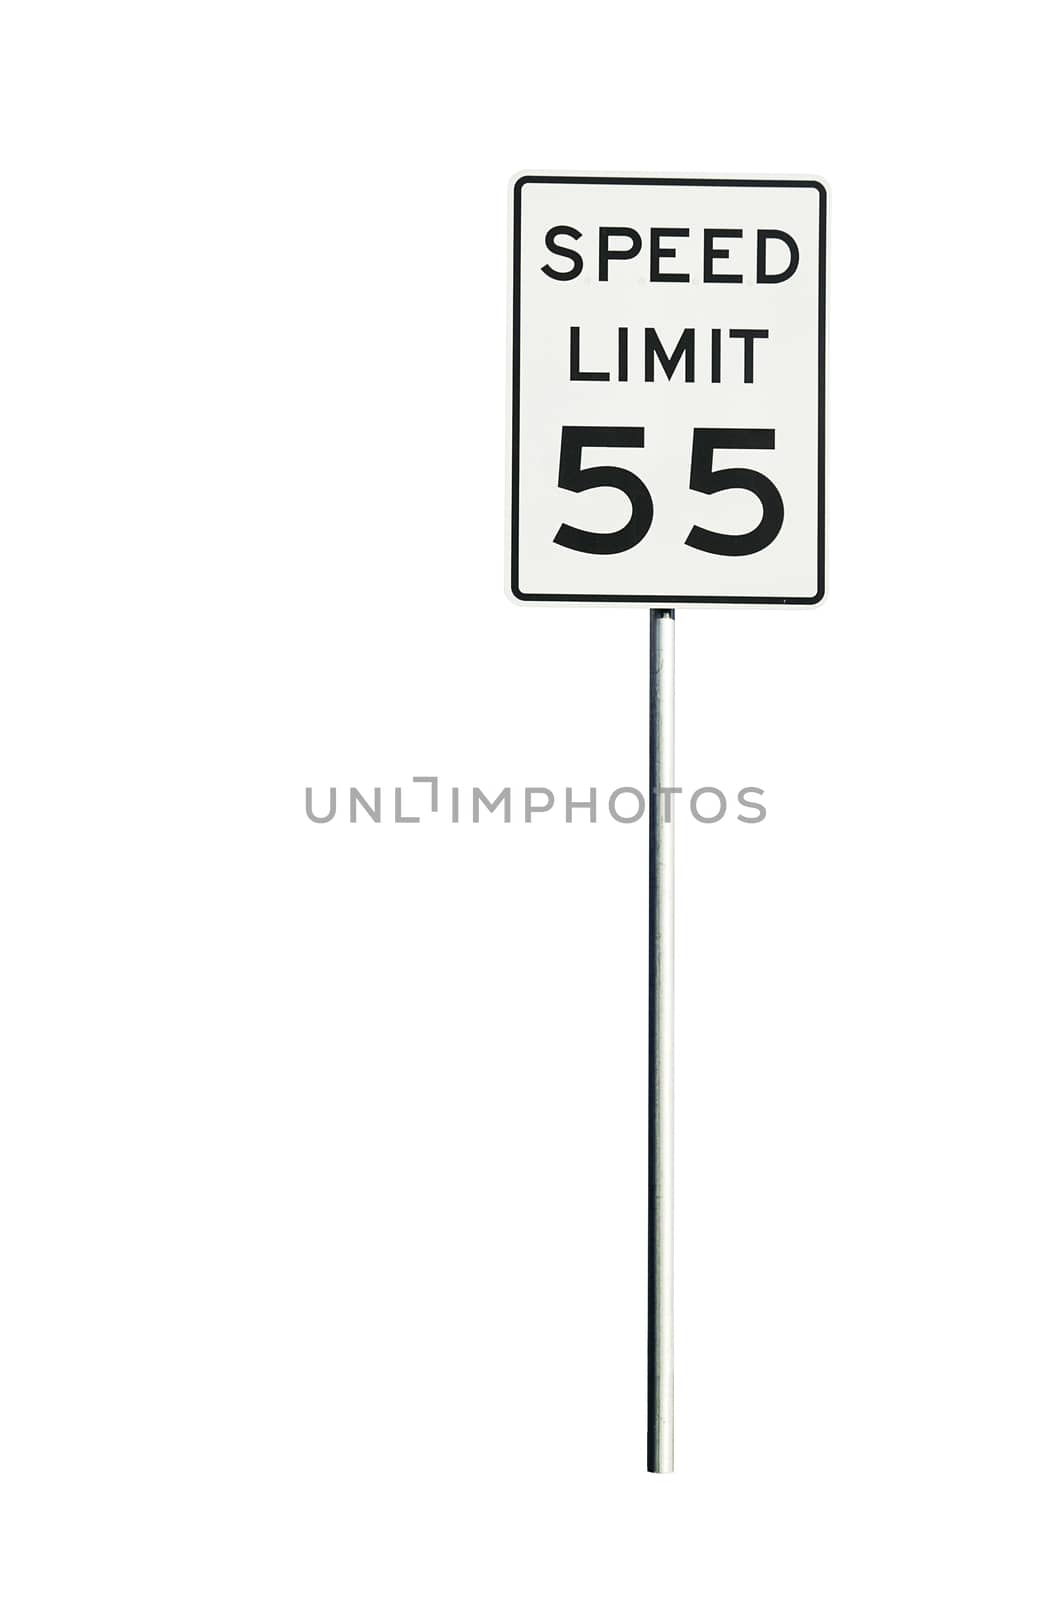 USA speed limit sign isolated on a white background with a clipping path